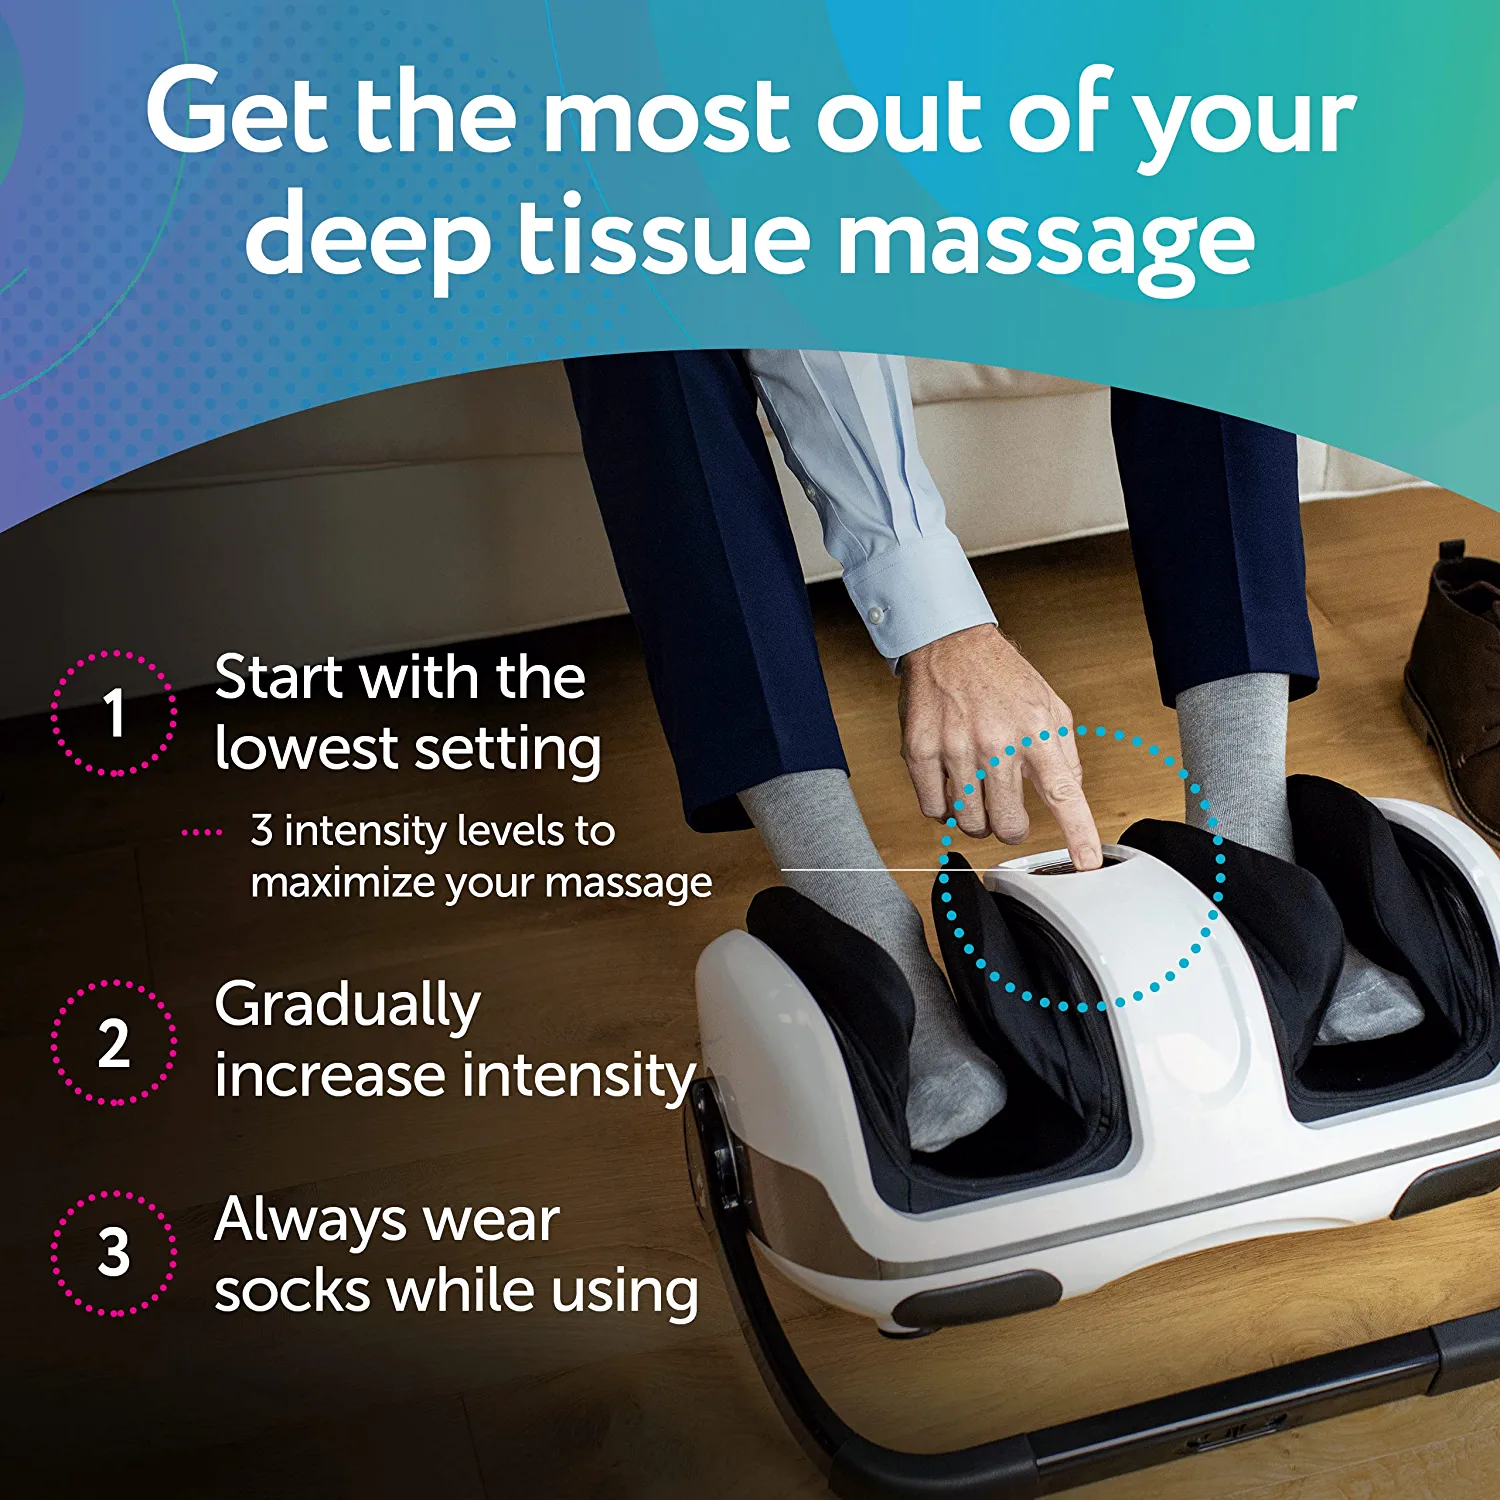 Foot massager from Amazon 2